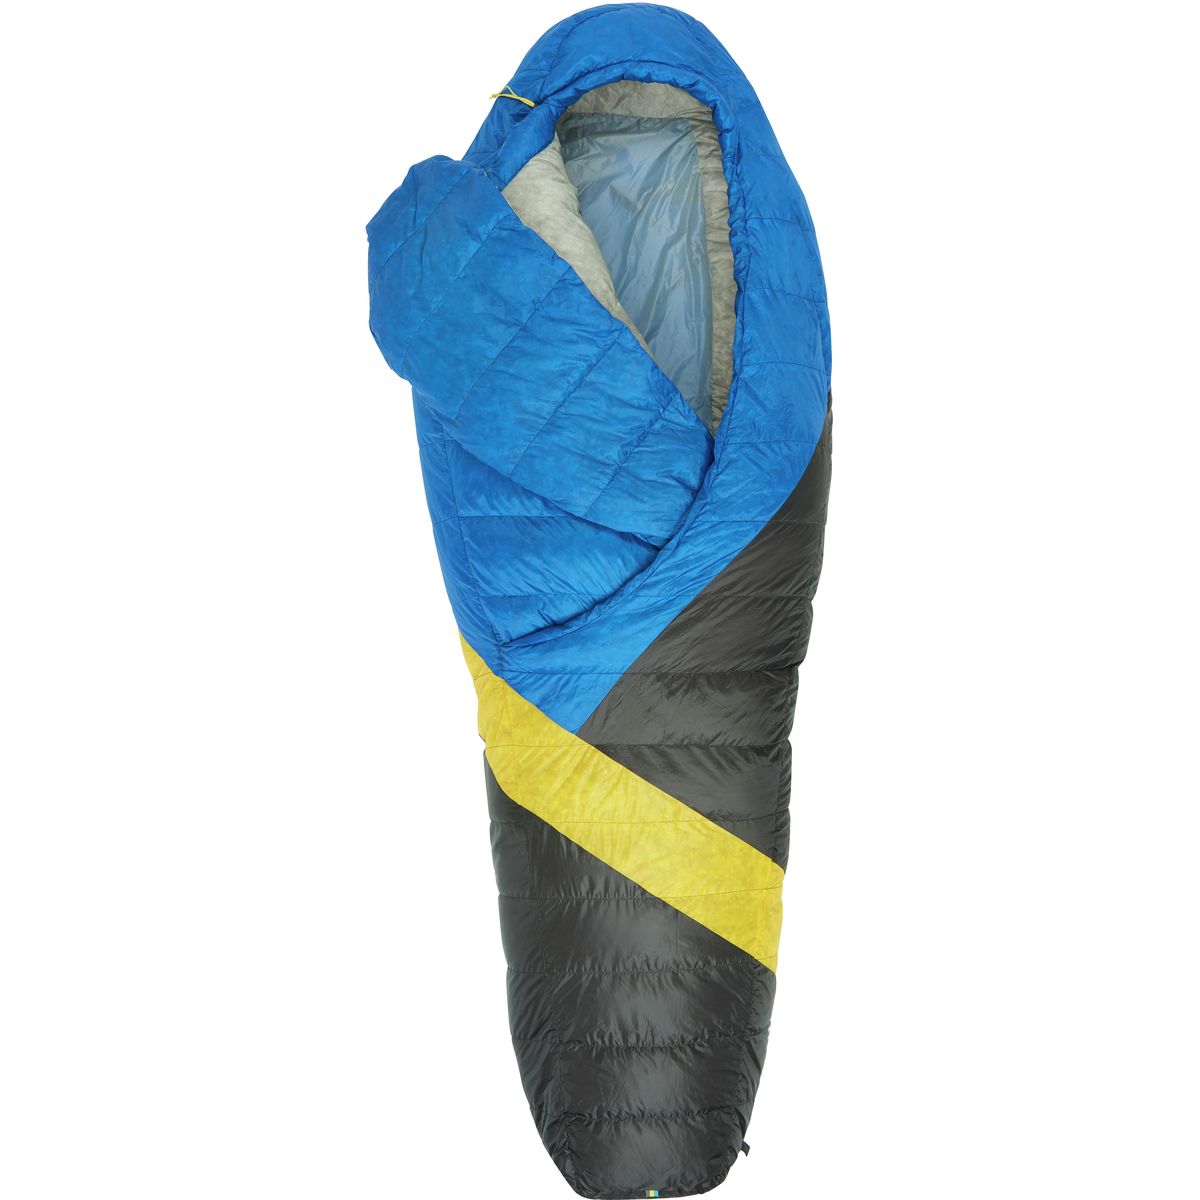 The Best Warm Weather Sleeping Bags for 2019 - Trailspace